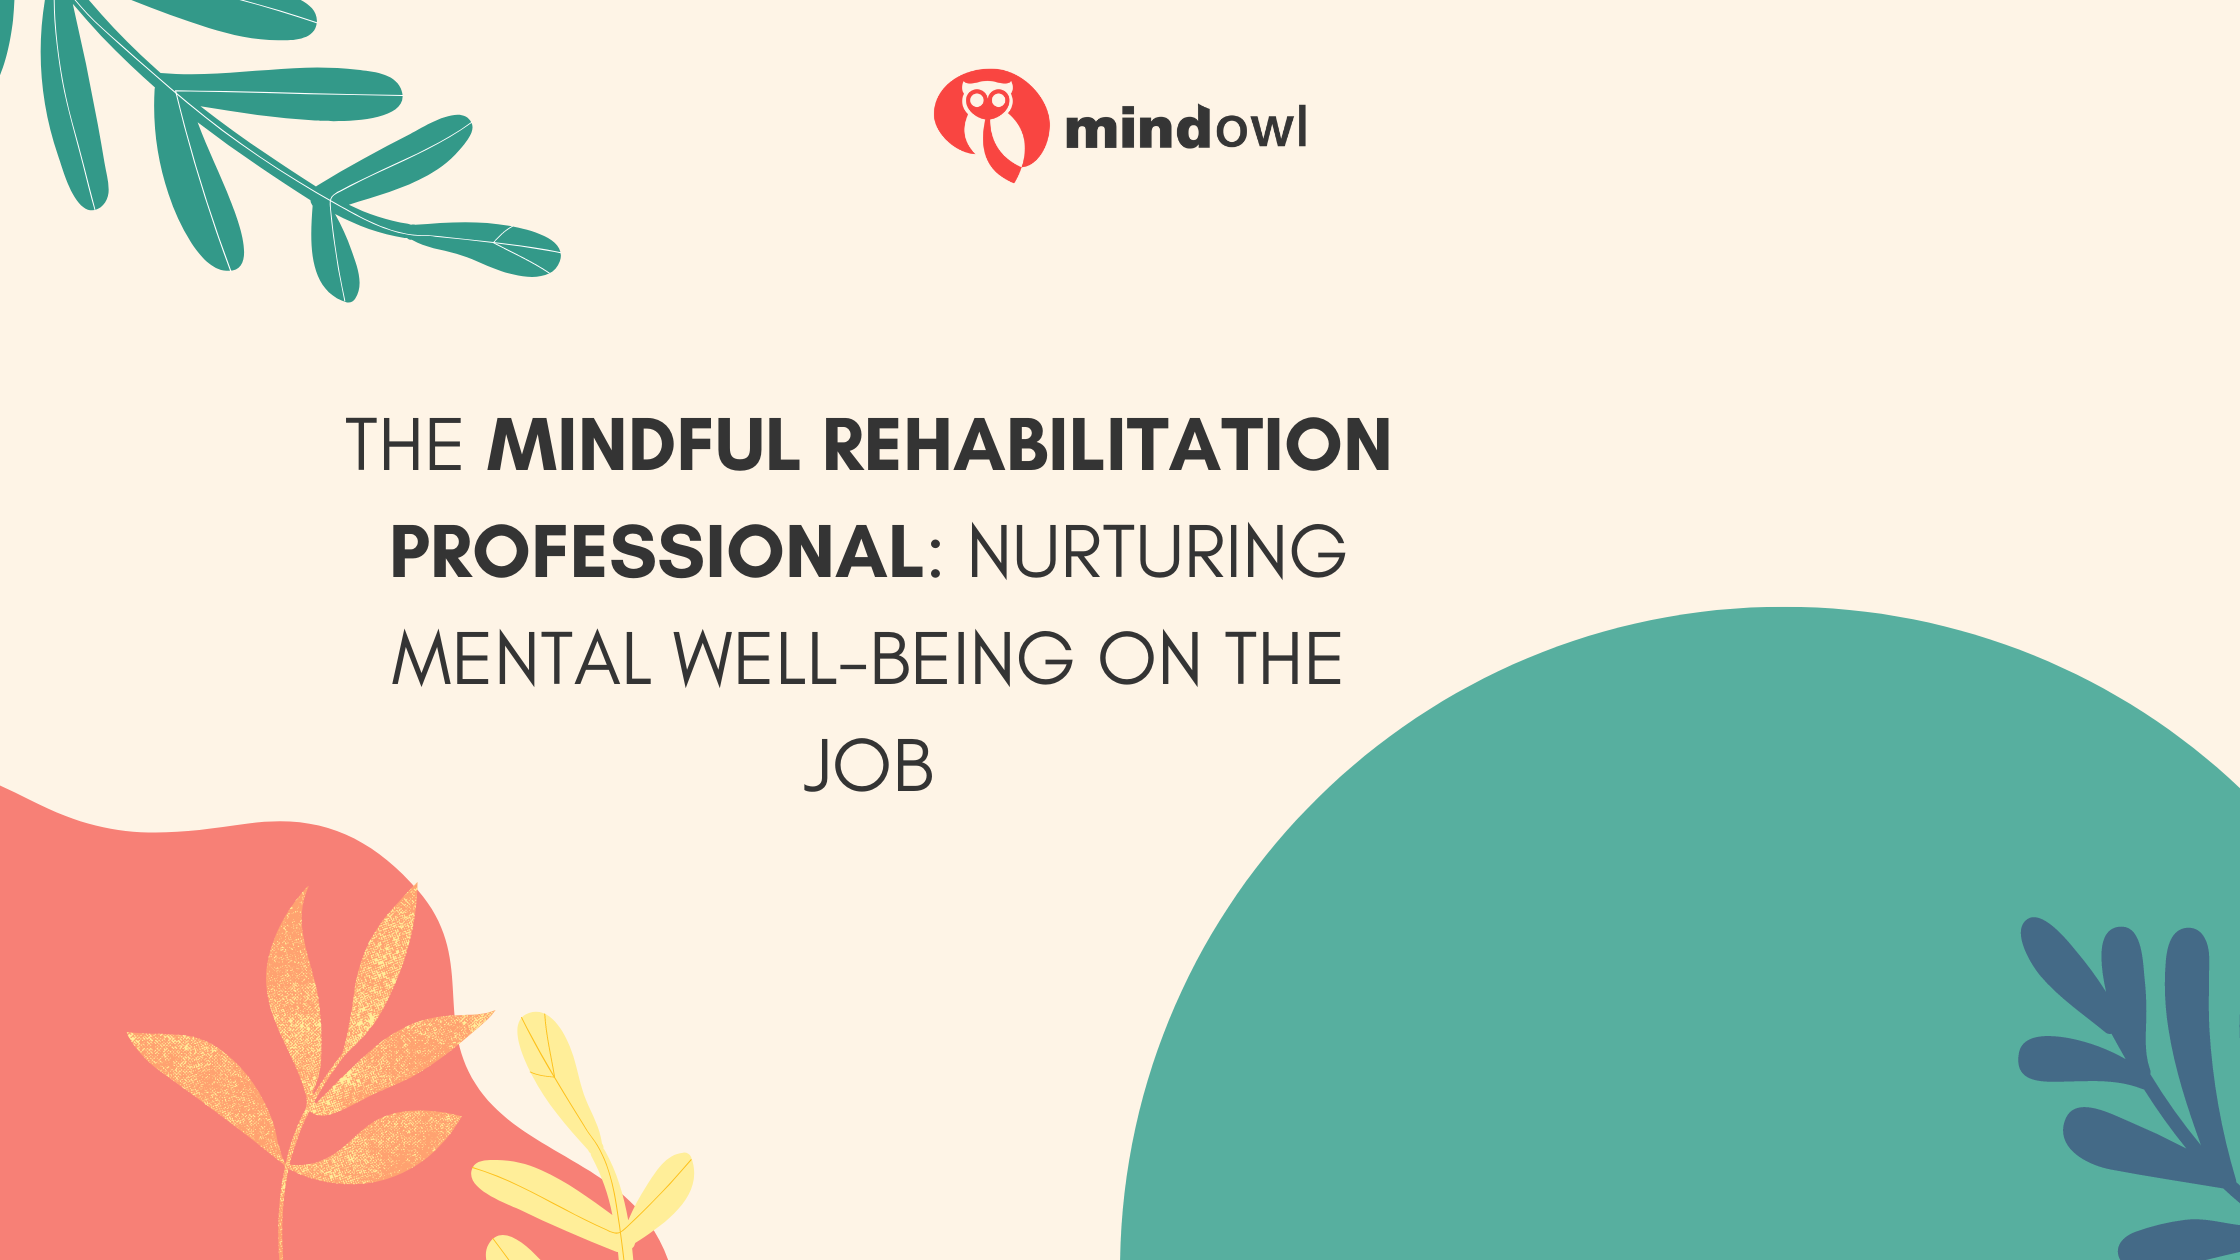 The Mindful Rehabilitation Professional: Nurturing Mental Well-being on the Job